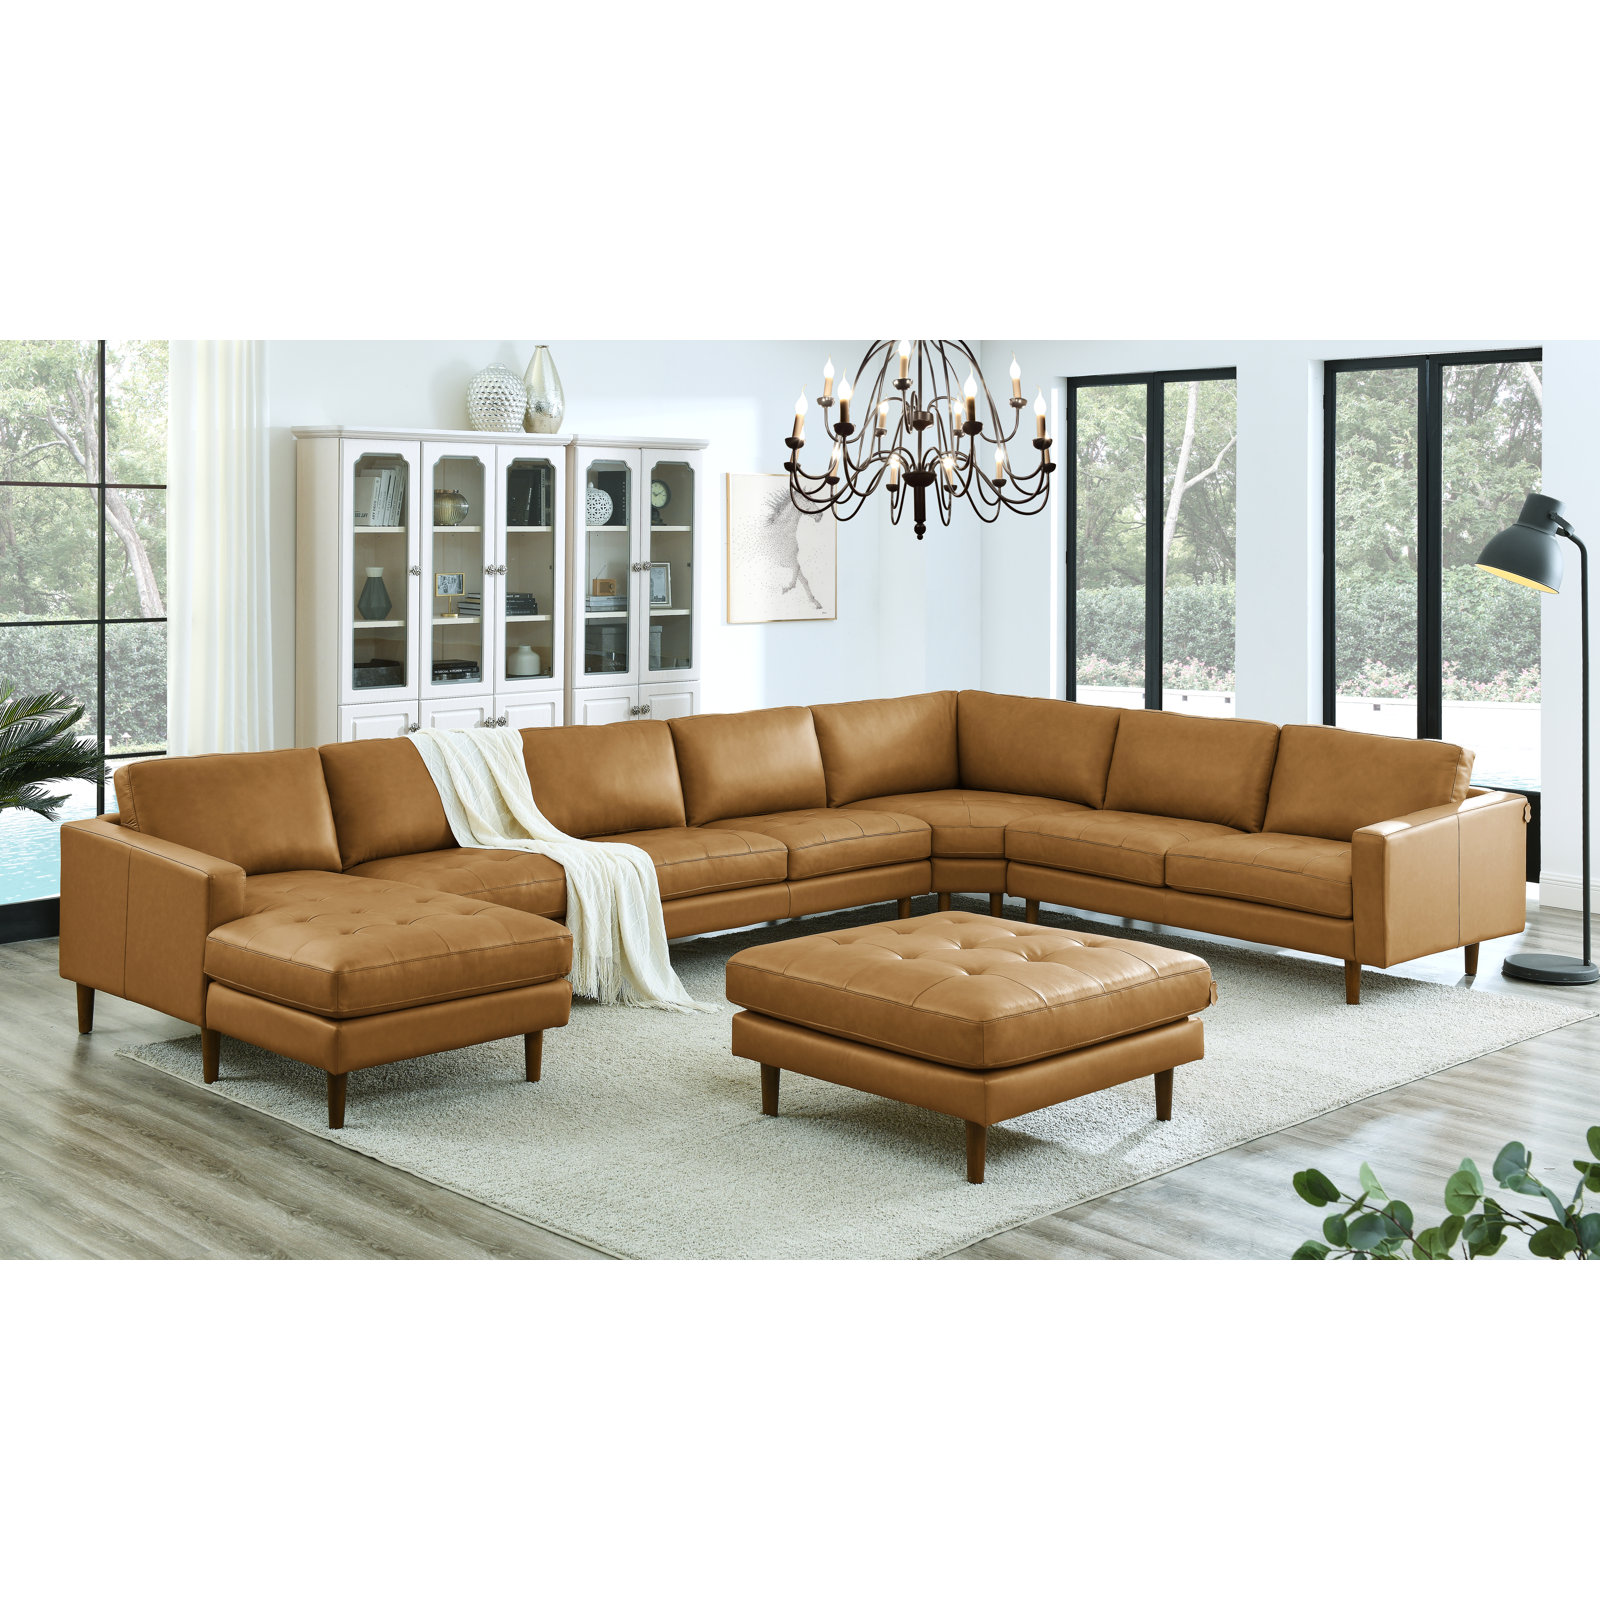 Wade Logan Allysson 174" Wide Leather Match Right Hand Facing Modular Corner Sectional with Ottoman & Reviews